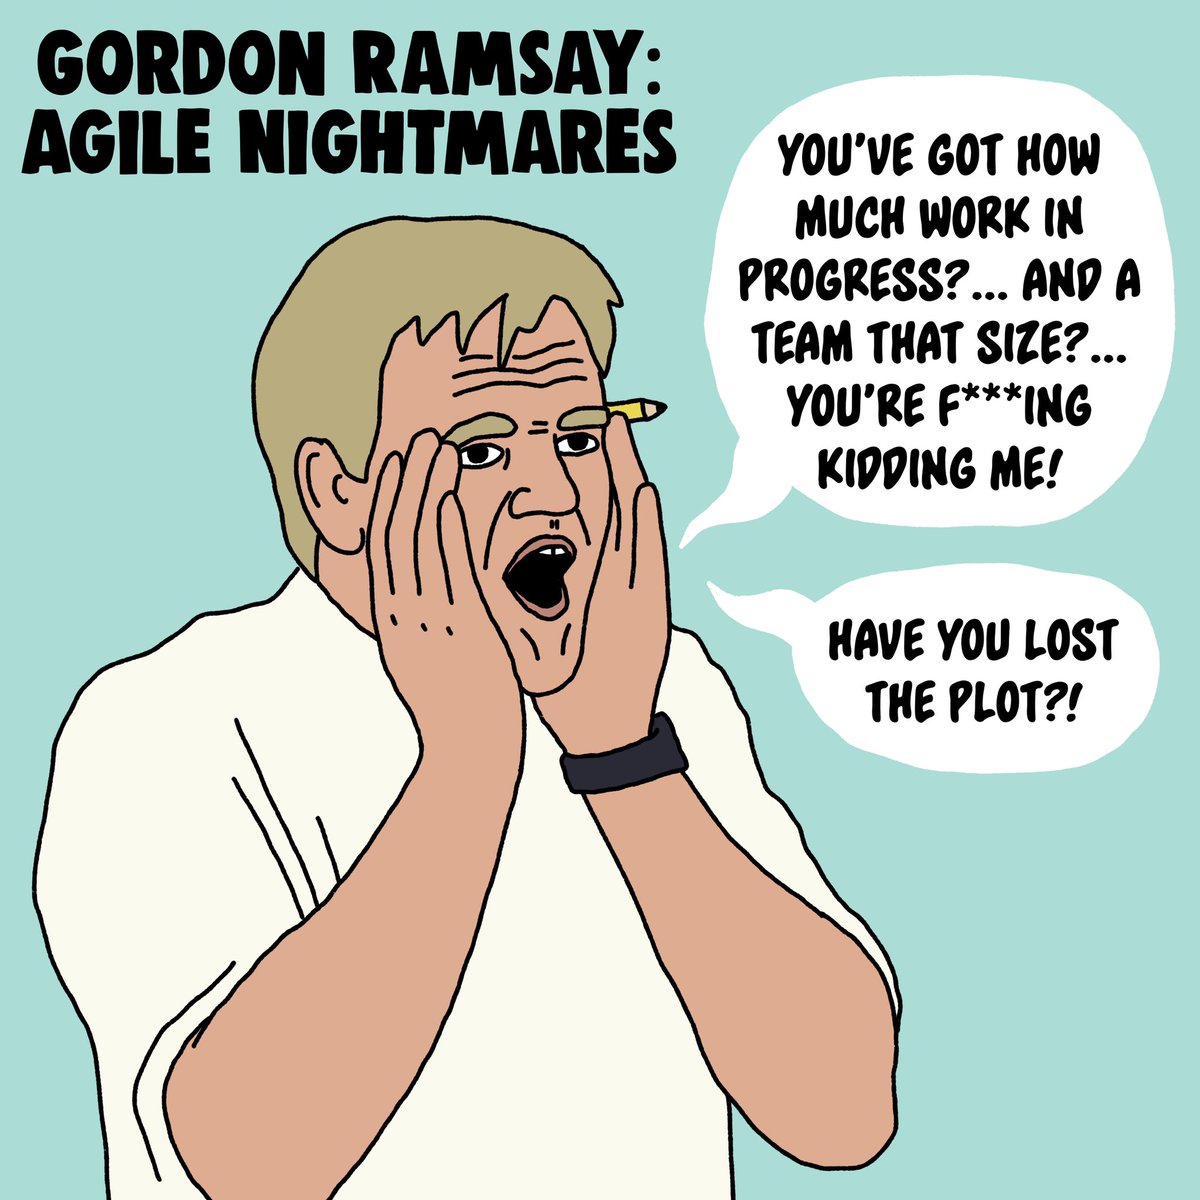 I’ve become transfixed by the idea of Gordon Ramsay doing a show about Agile team nightmares where he’s an agile coach. Each episode he shouts at a new team until they start shipping good stuff https://t.co/i1sdrvL5Lf